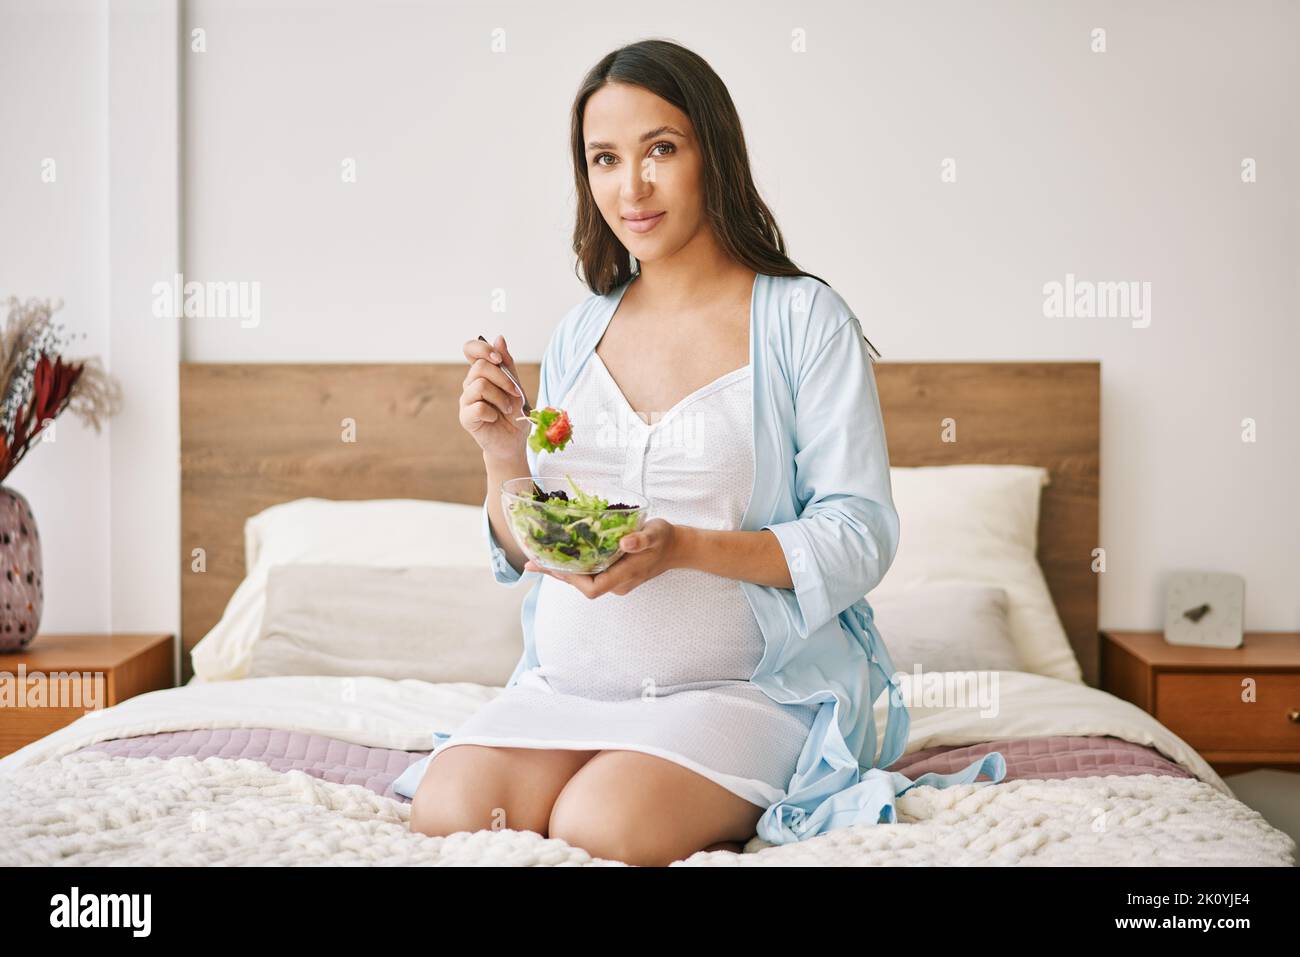 Portrait of young pregnant woman in pajama eating a fresh salad sitting in bed. Conscious motherhood. Healthy food concept Stock Photo